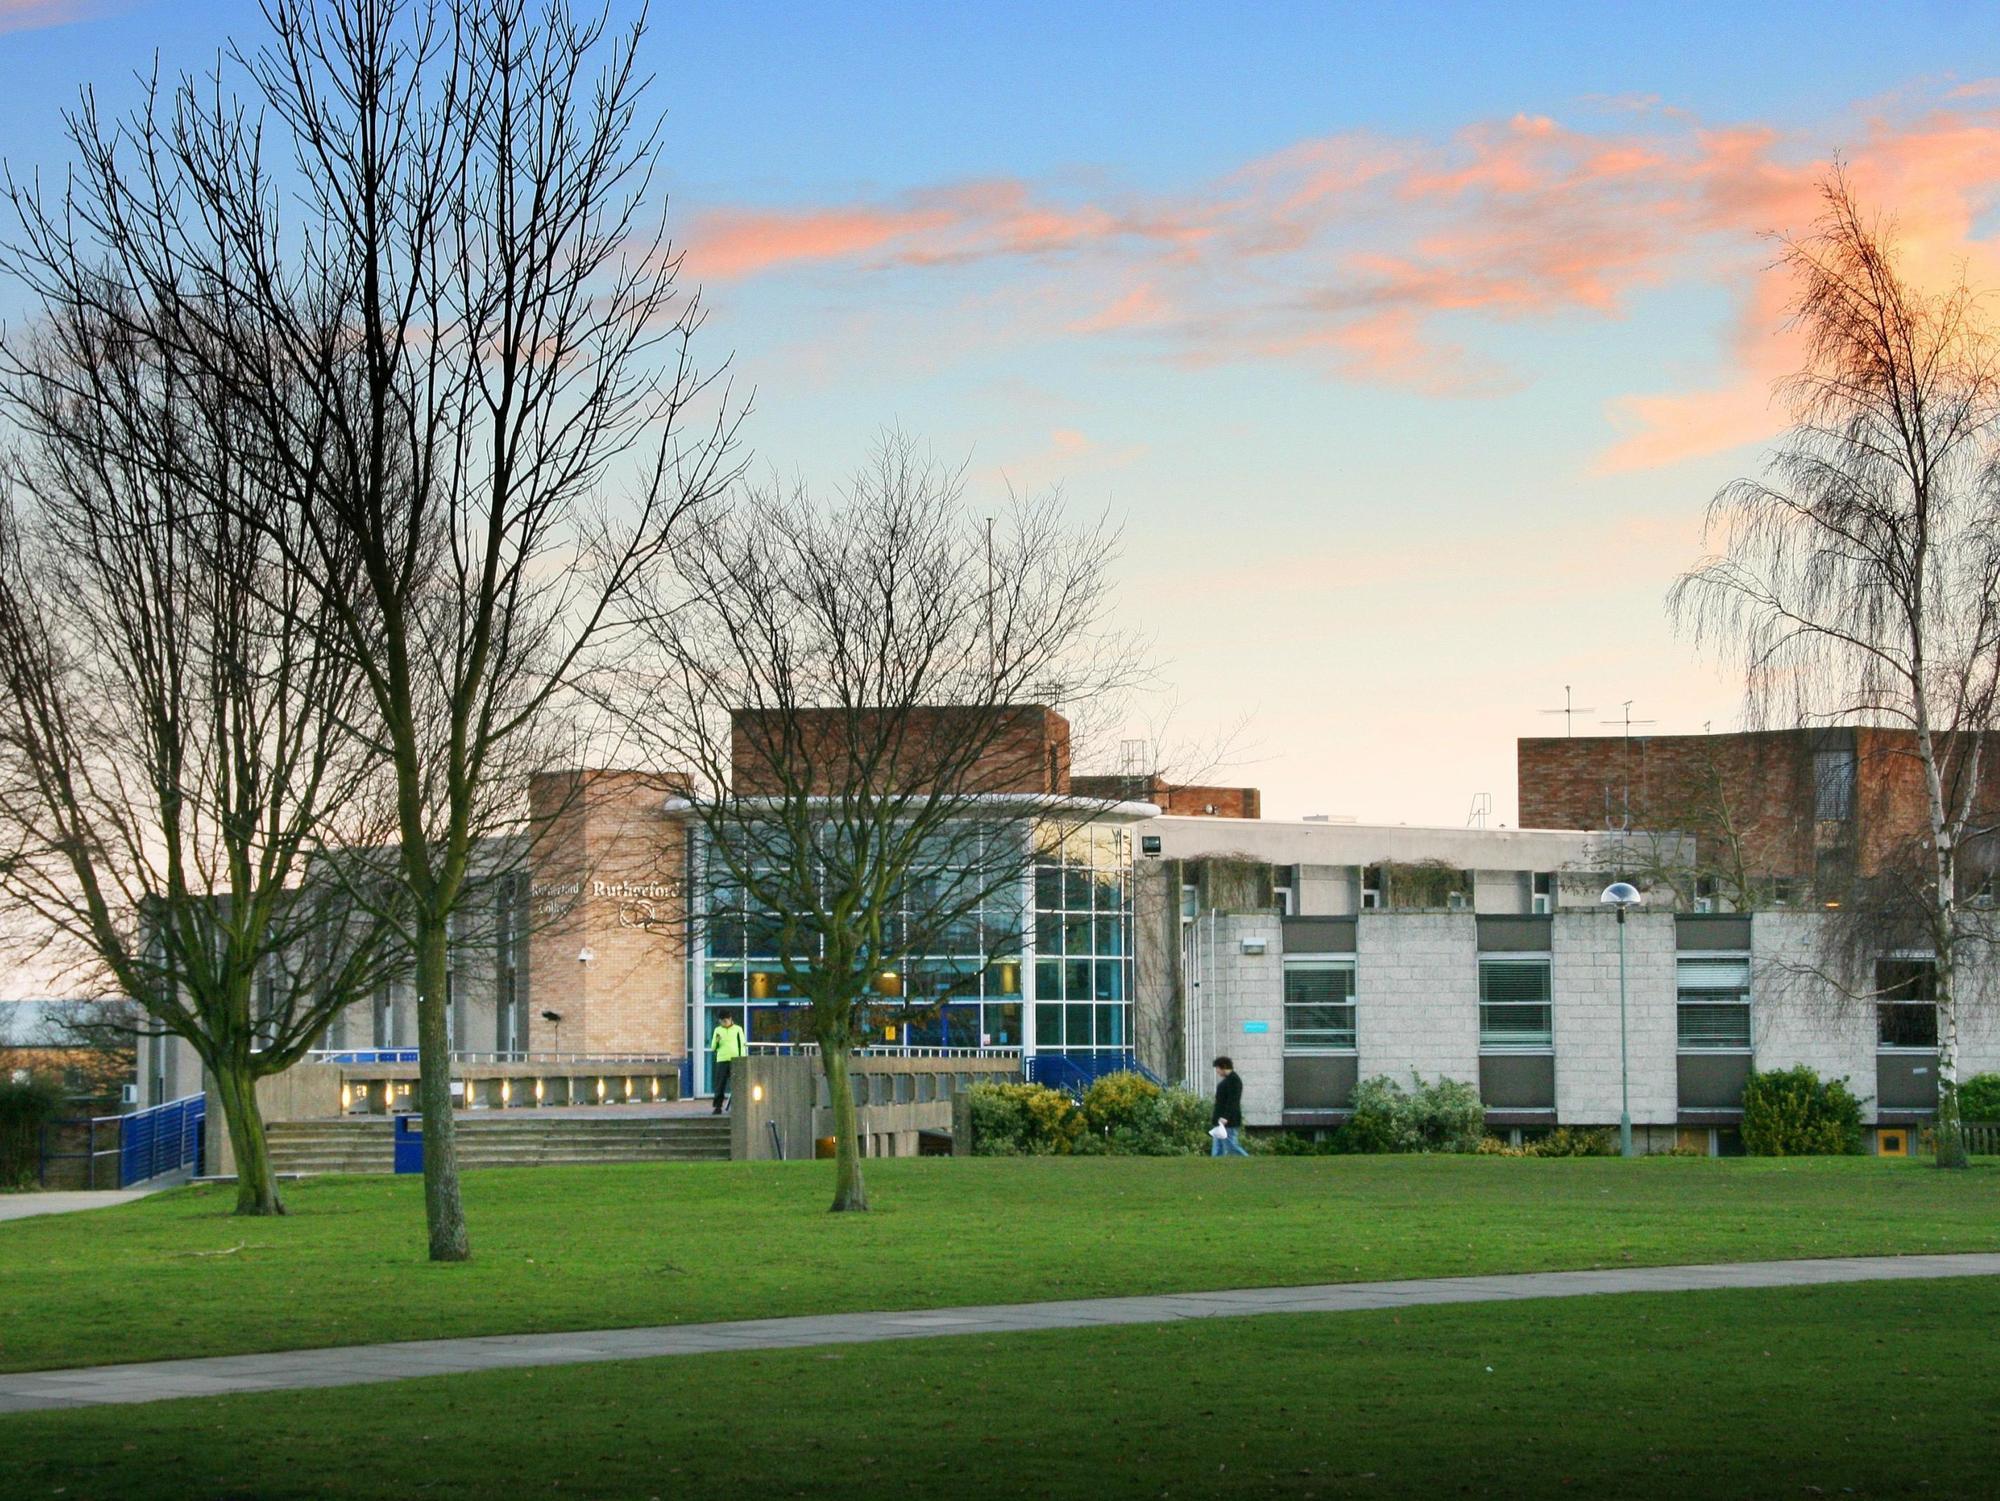 Rutherford College University Of Kent Canterbury Exterior photo